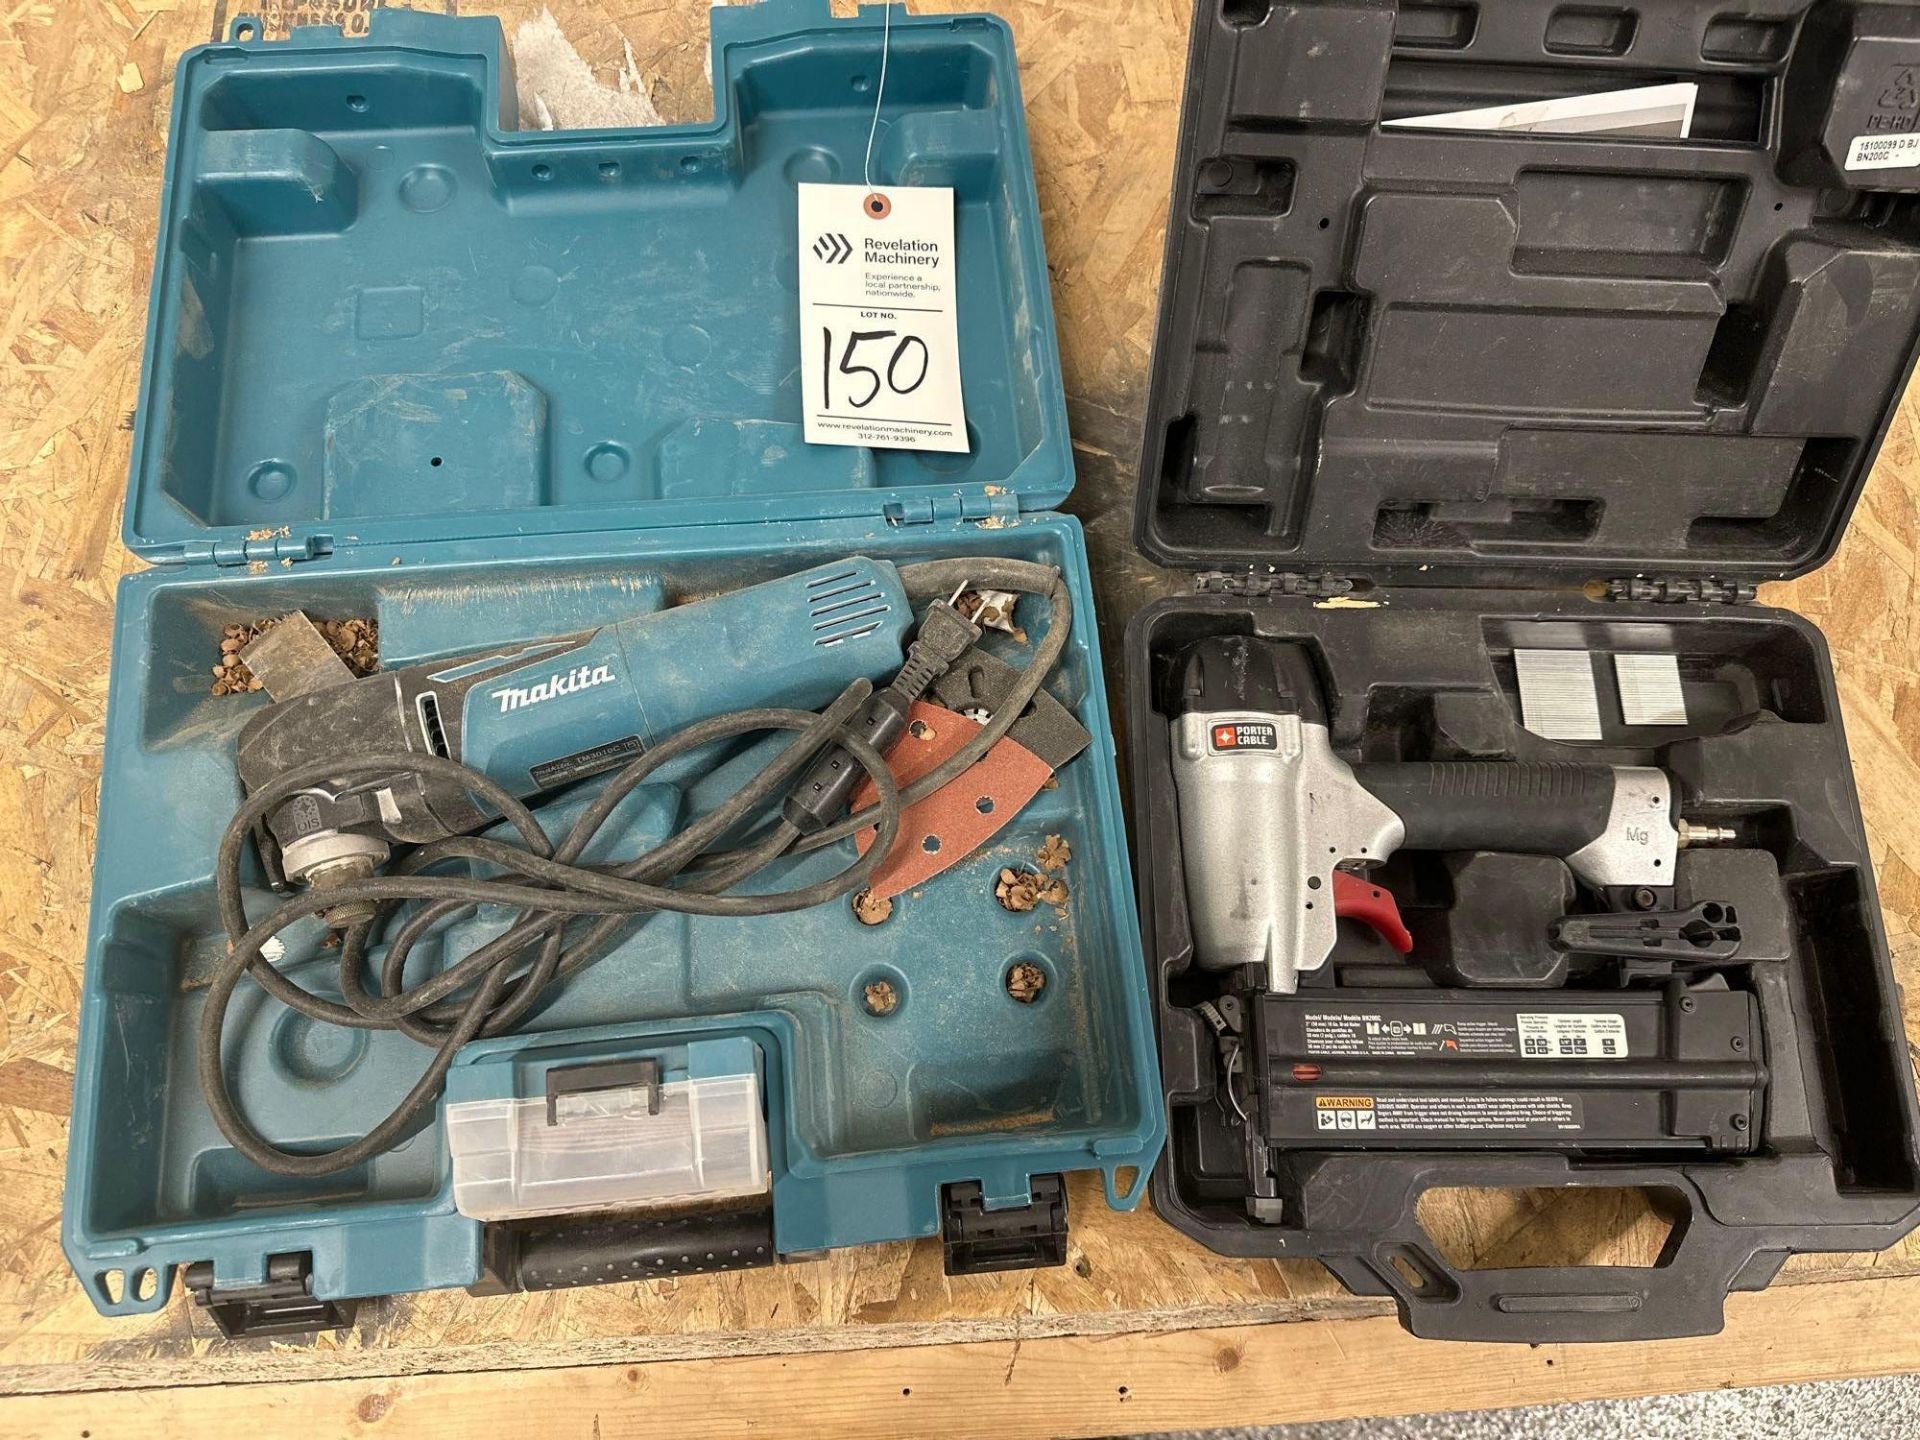 MAKITA TM3010C CORDED MULTI TOOL AND PORTER CABLE BN200C NAILER